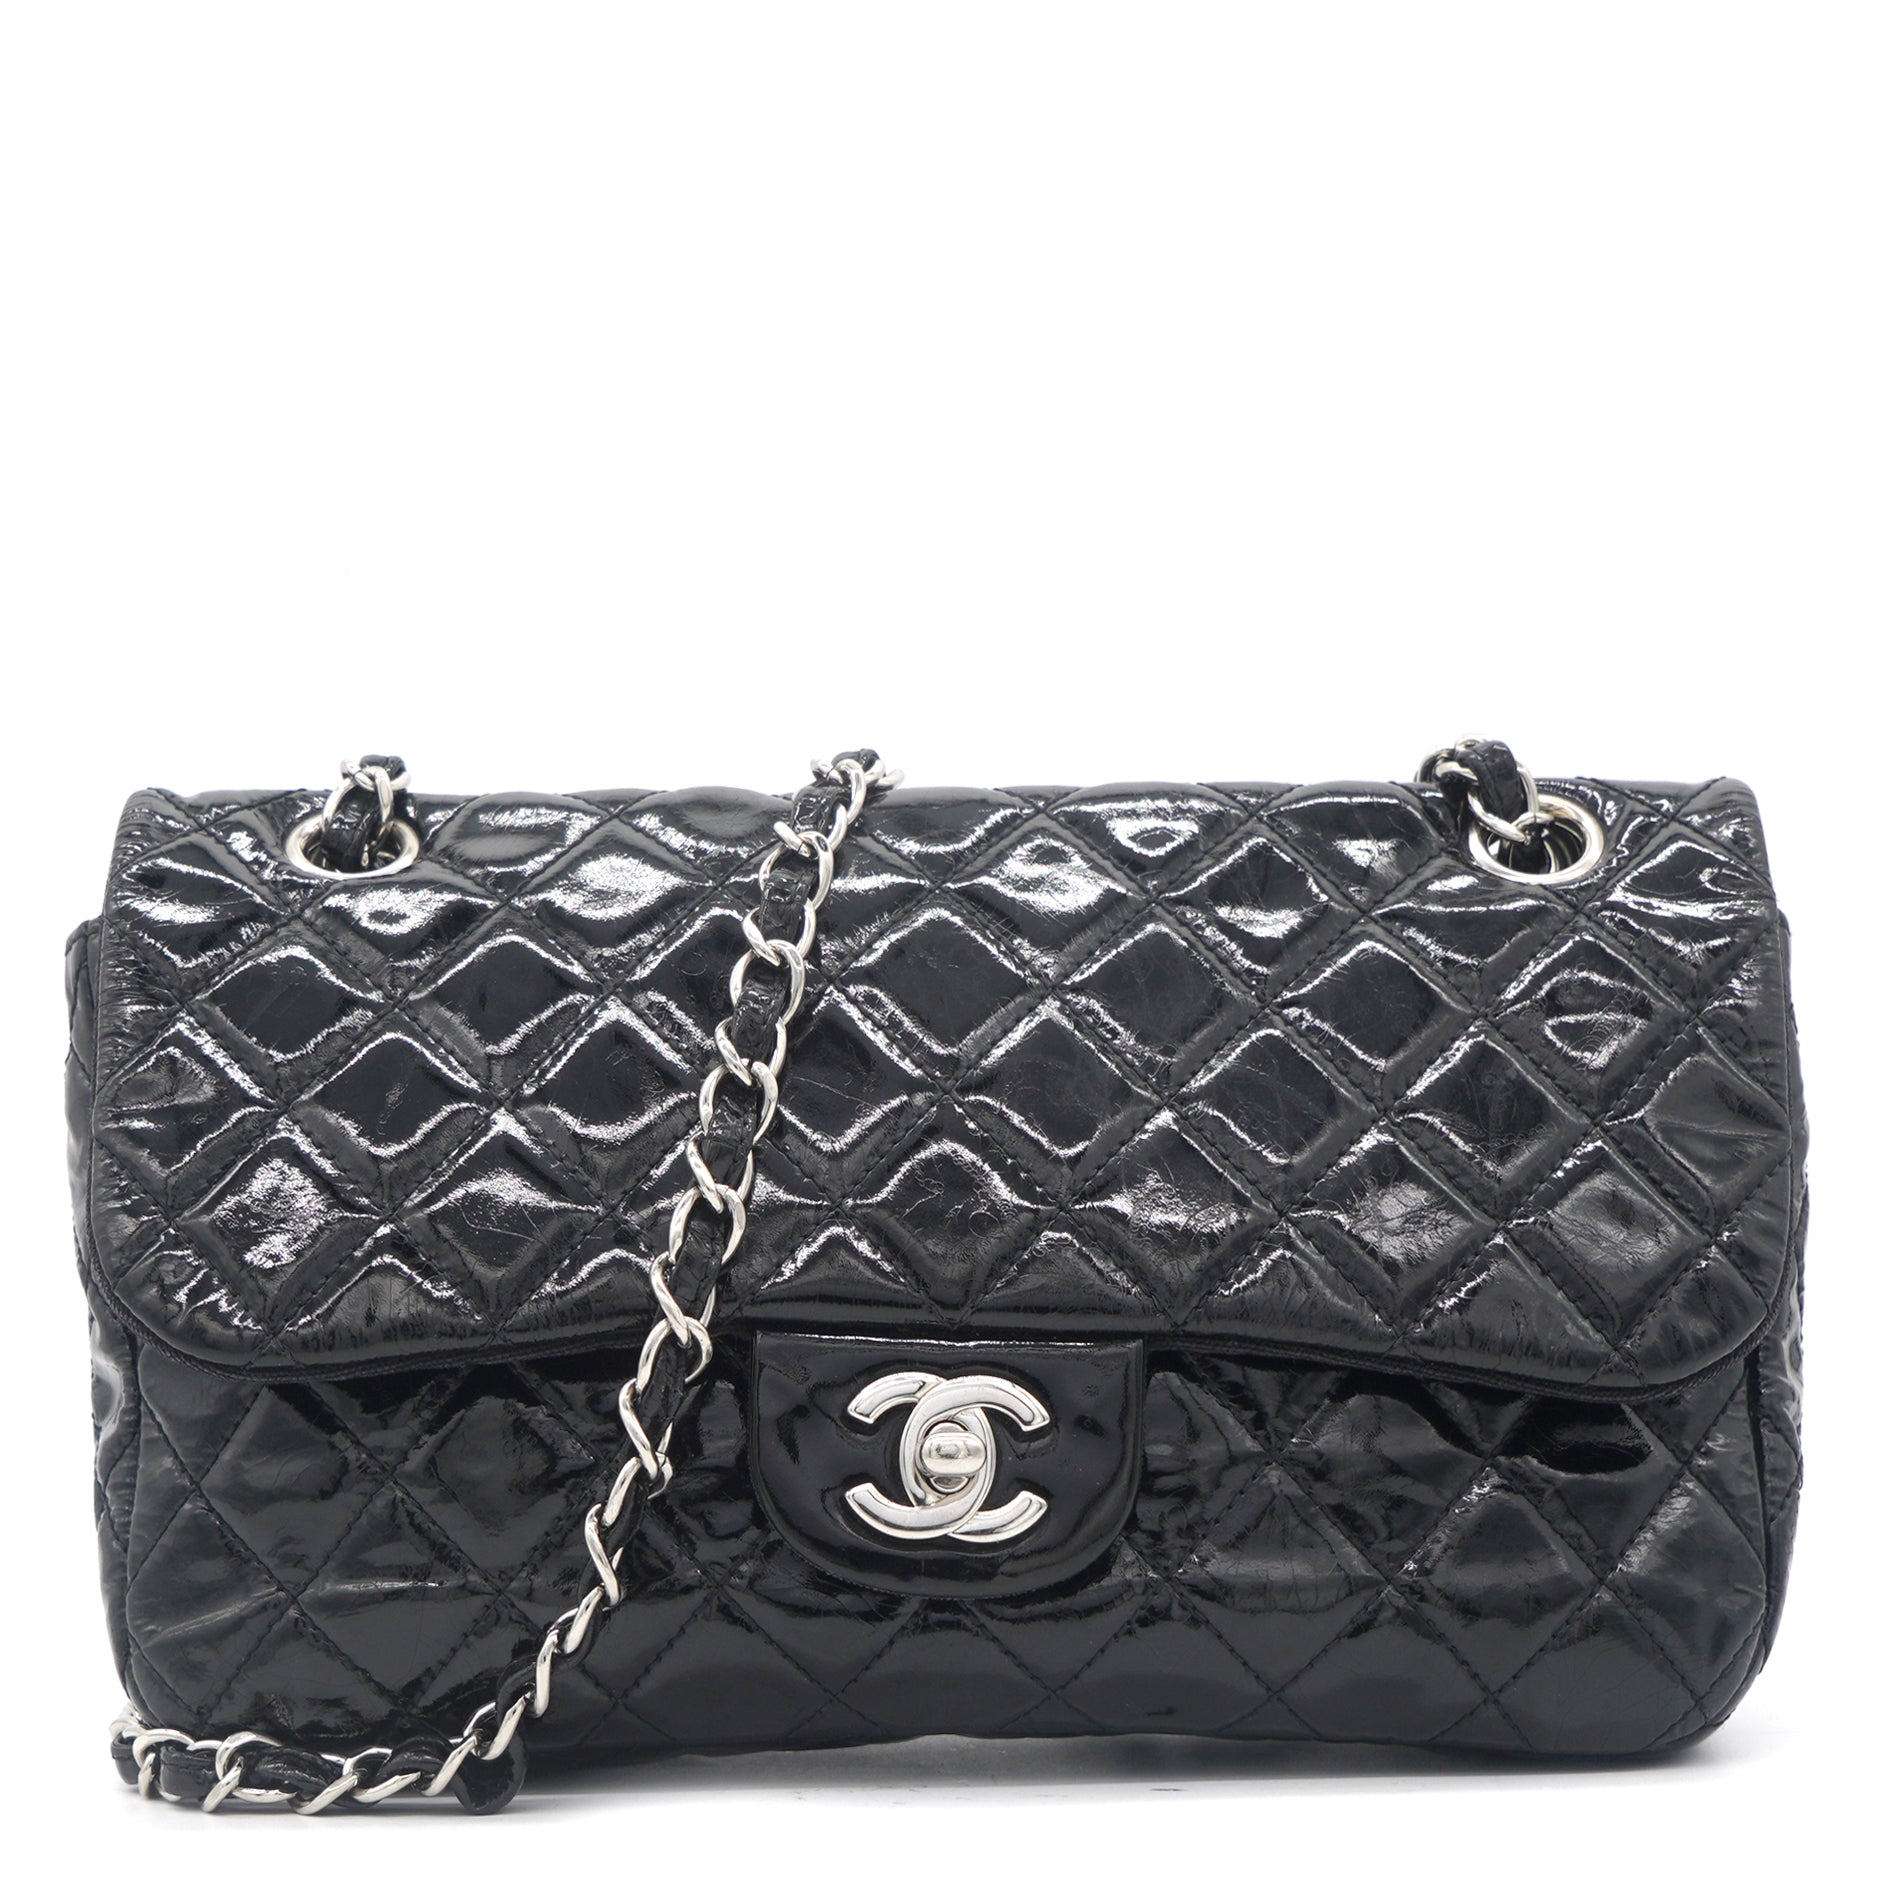 Vintage Chanel medium double flap bag - THE HOUSE OF WAUW